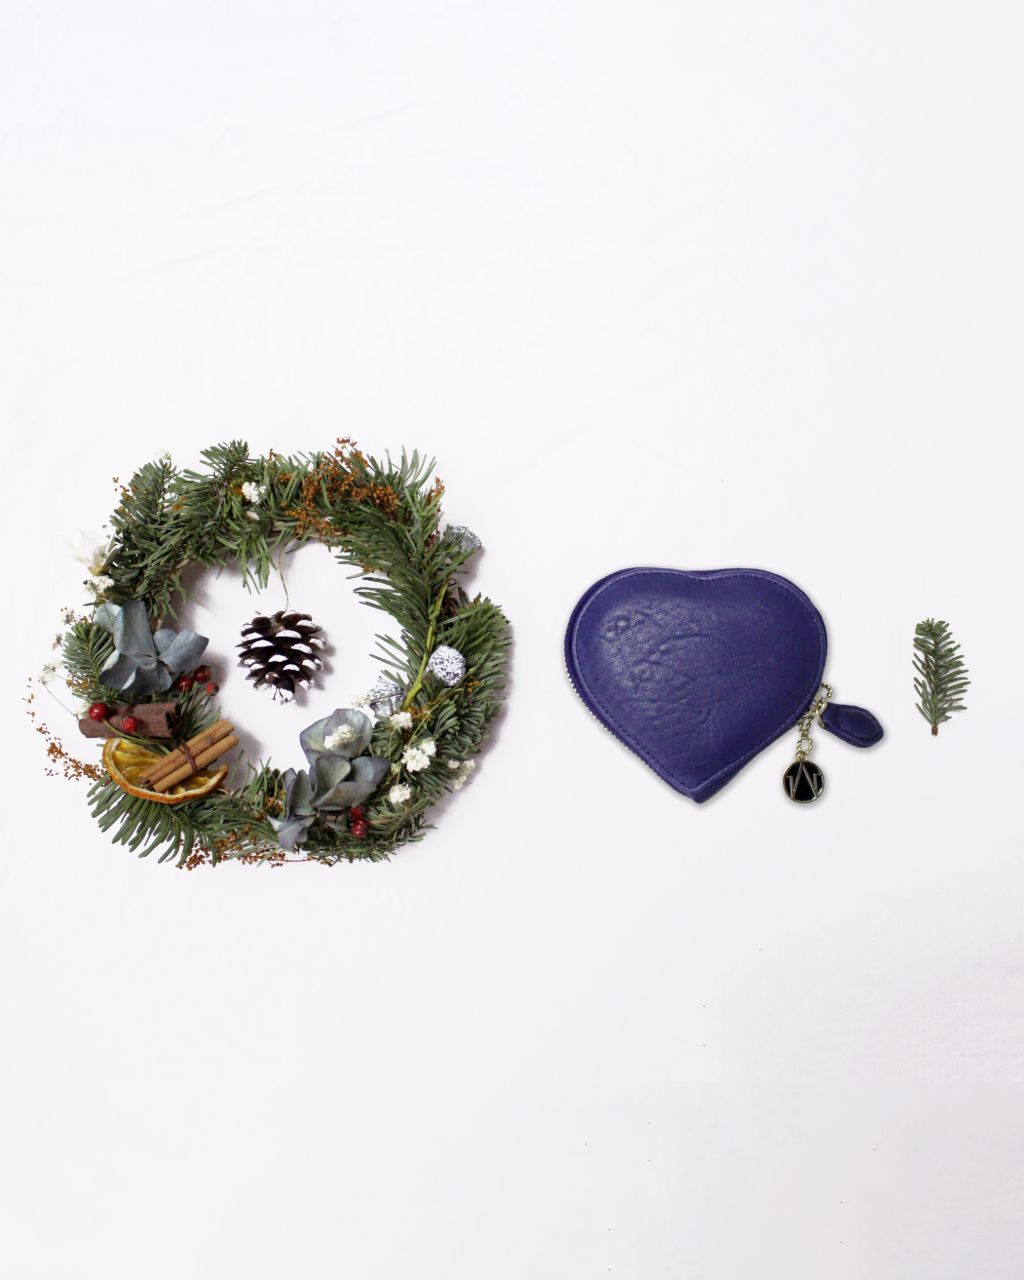 Christmas ring, heart shape coins purse in royal blue